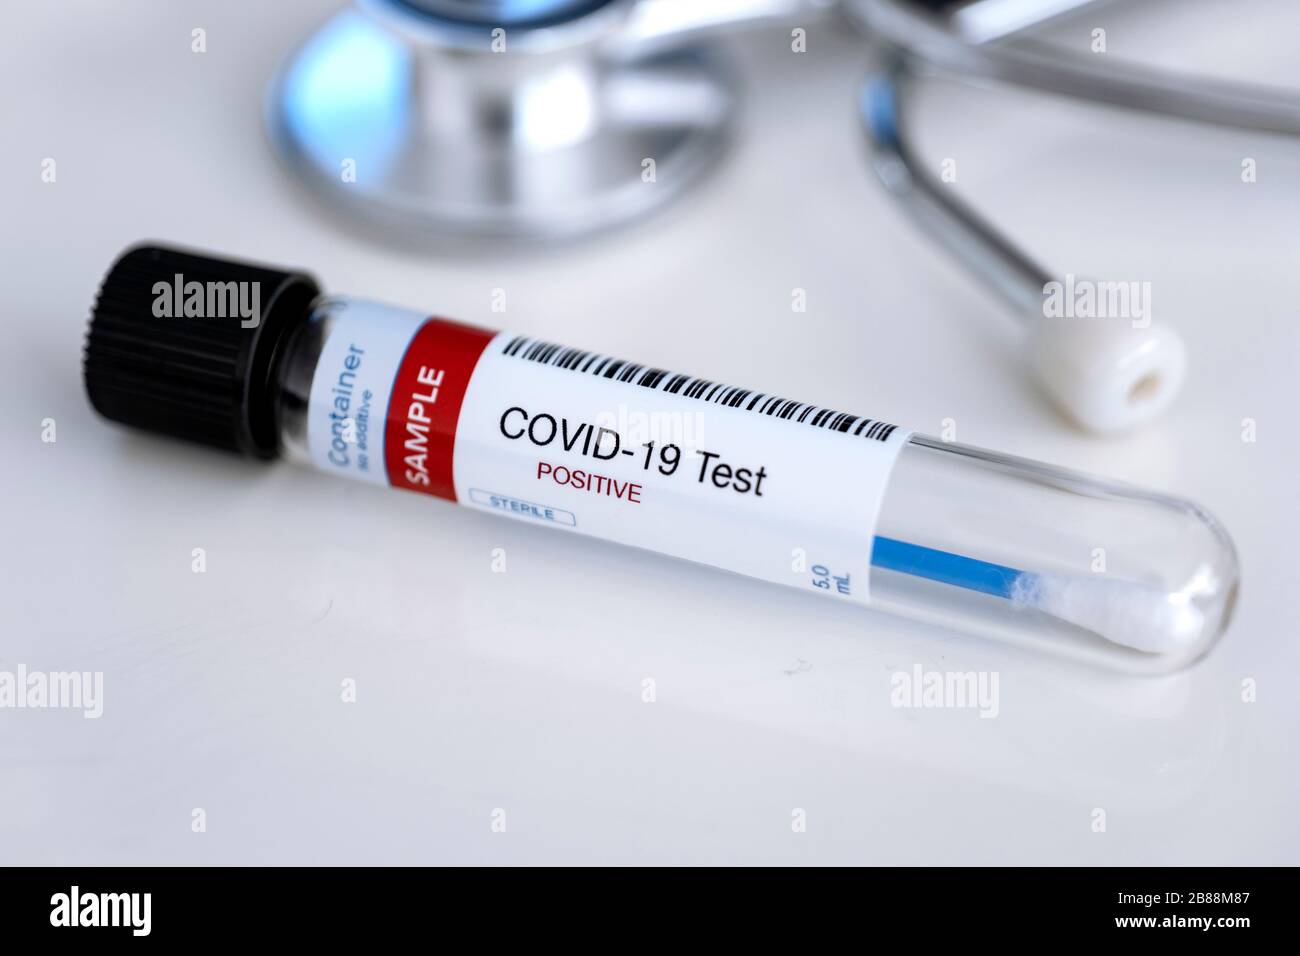 Testing for presence of coronavirus. Tube containing a swab sample for COVID-19 that has tested positive. Stock Photo